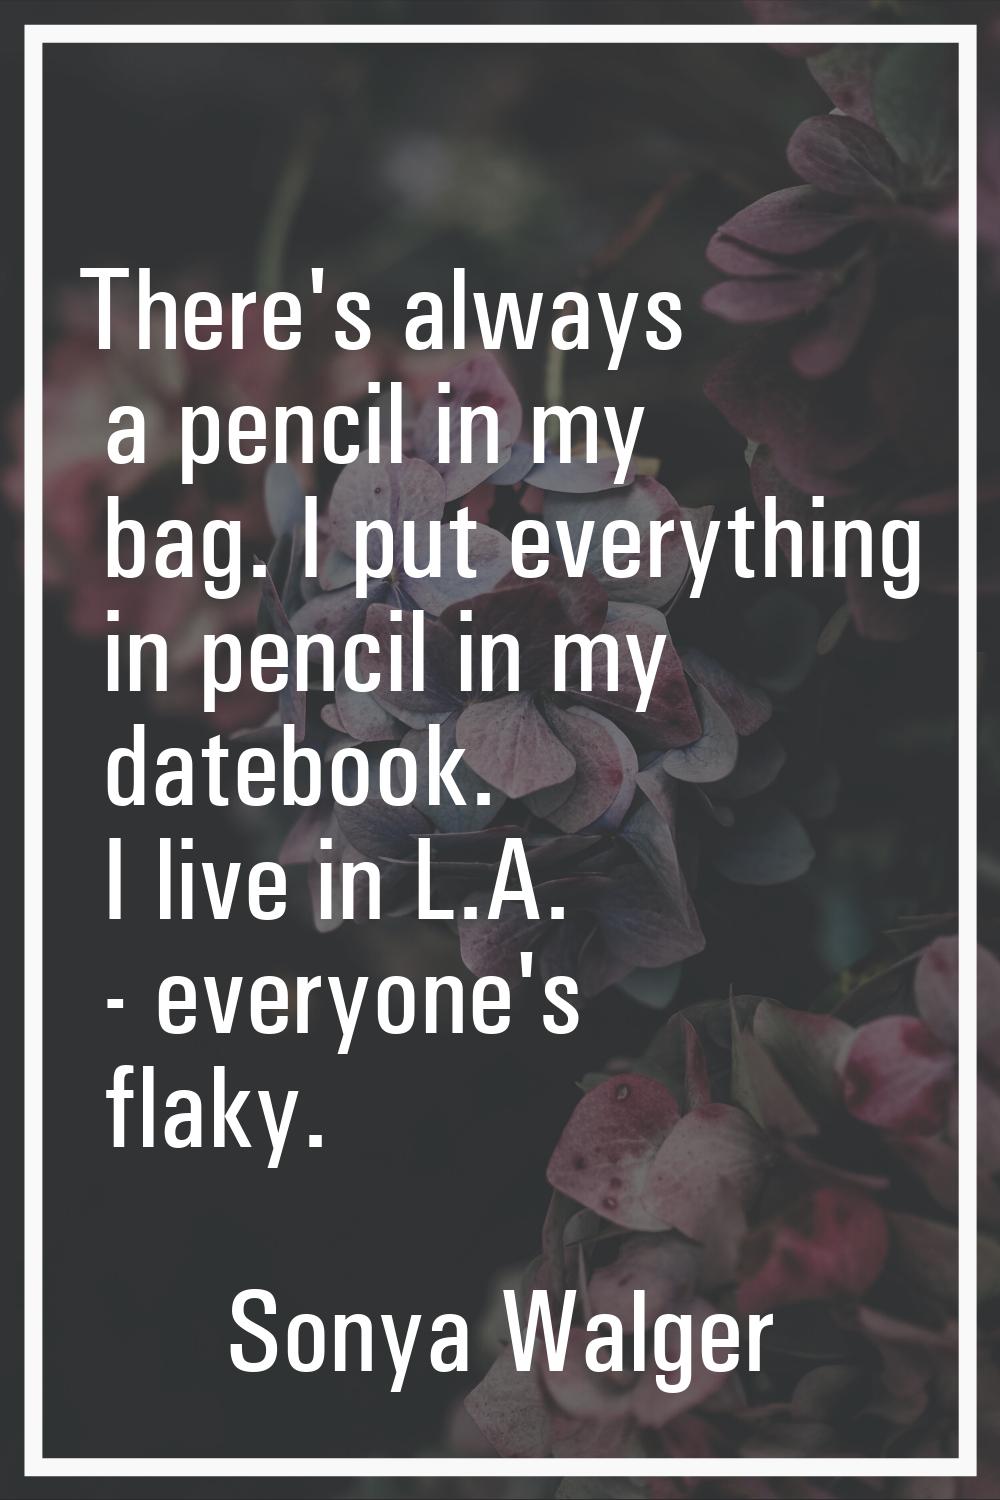 There's always a pencil in my bag. I put everything in pencil in my datebook. I live in L.A. - ever